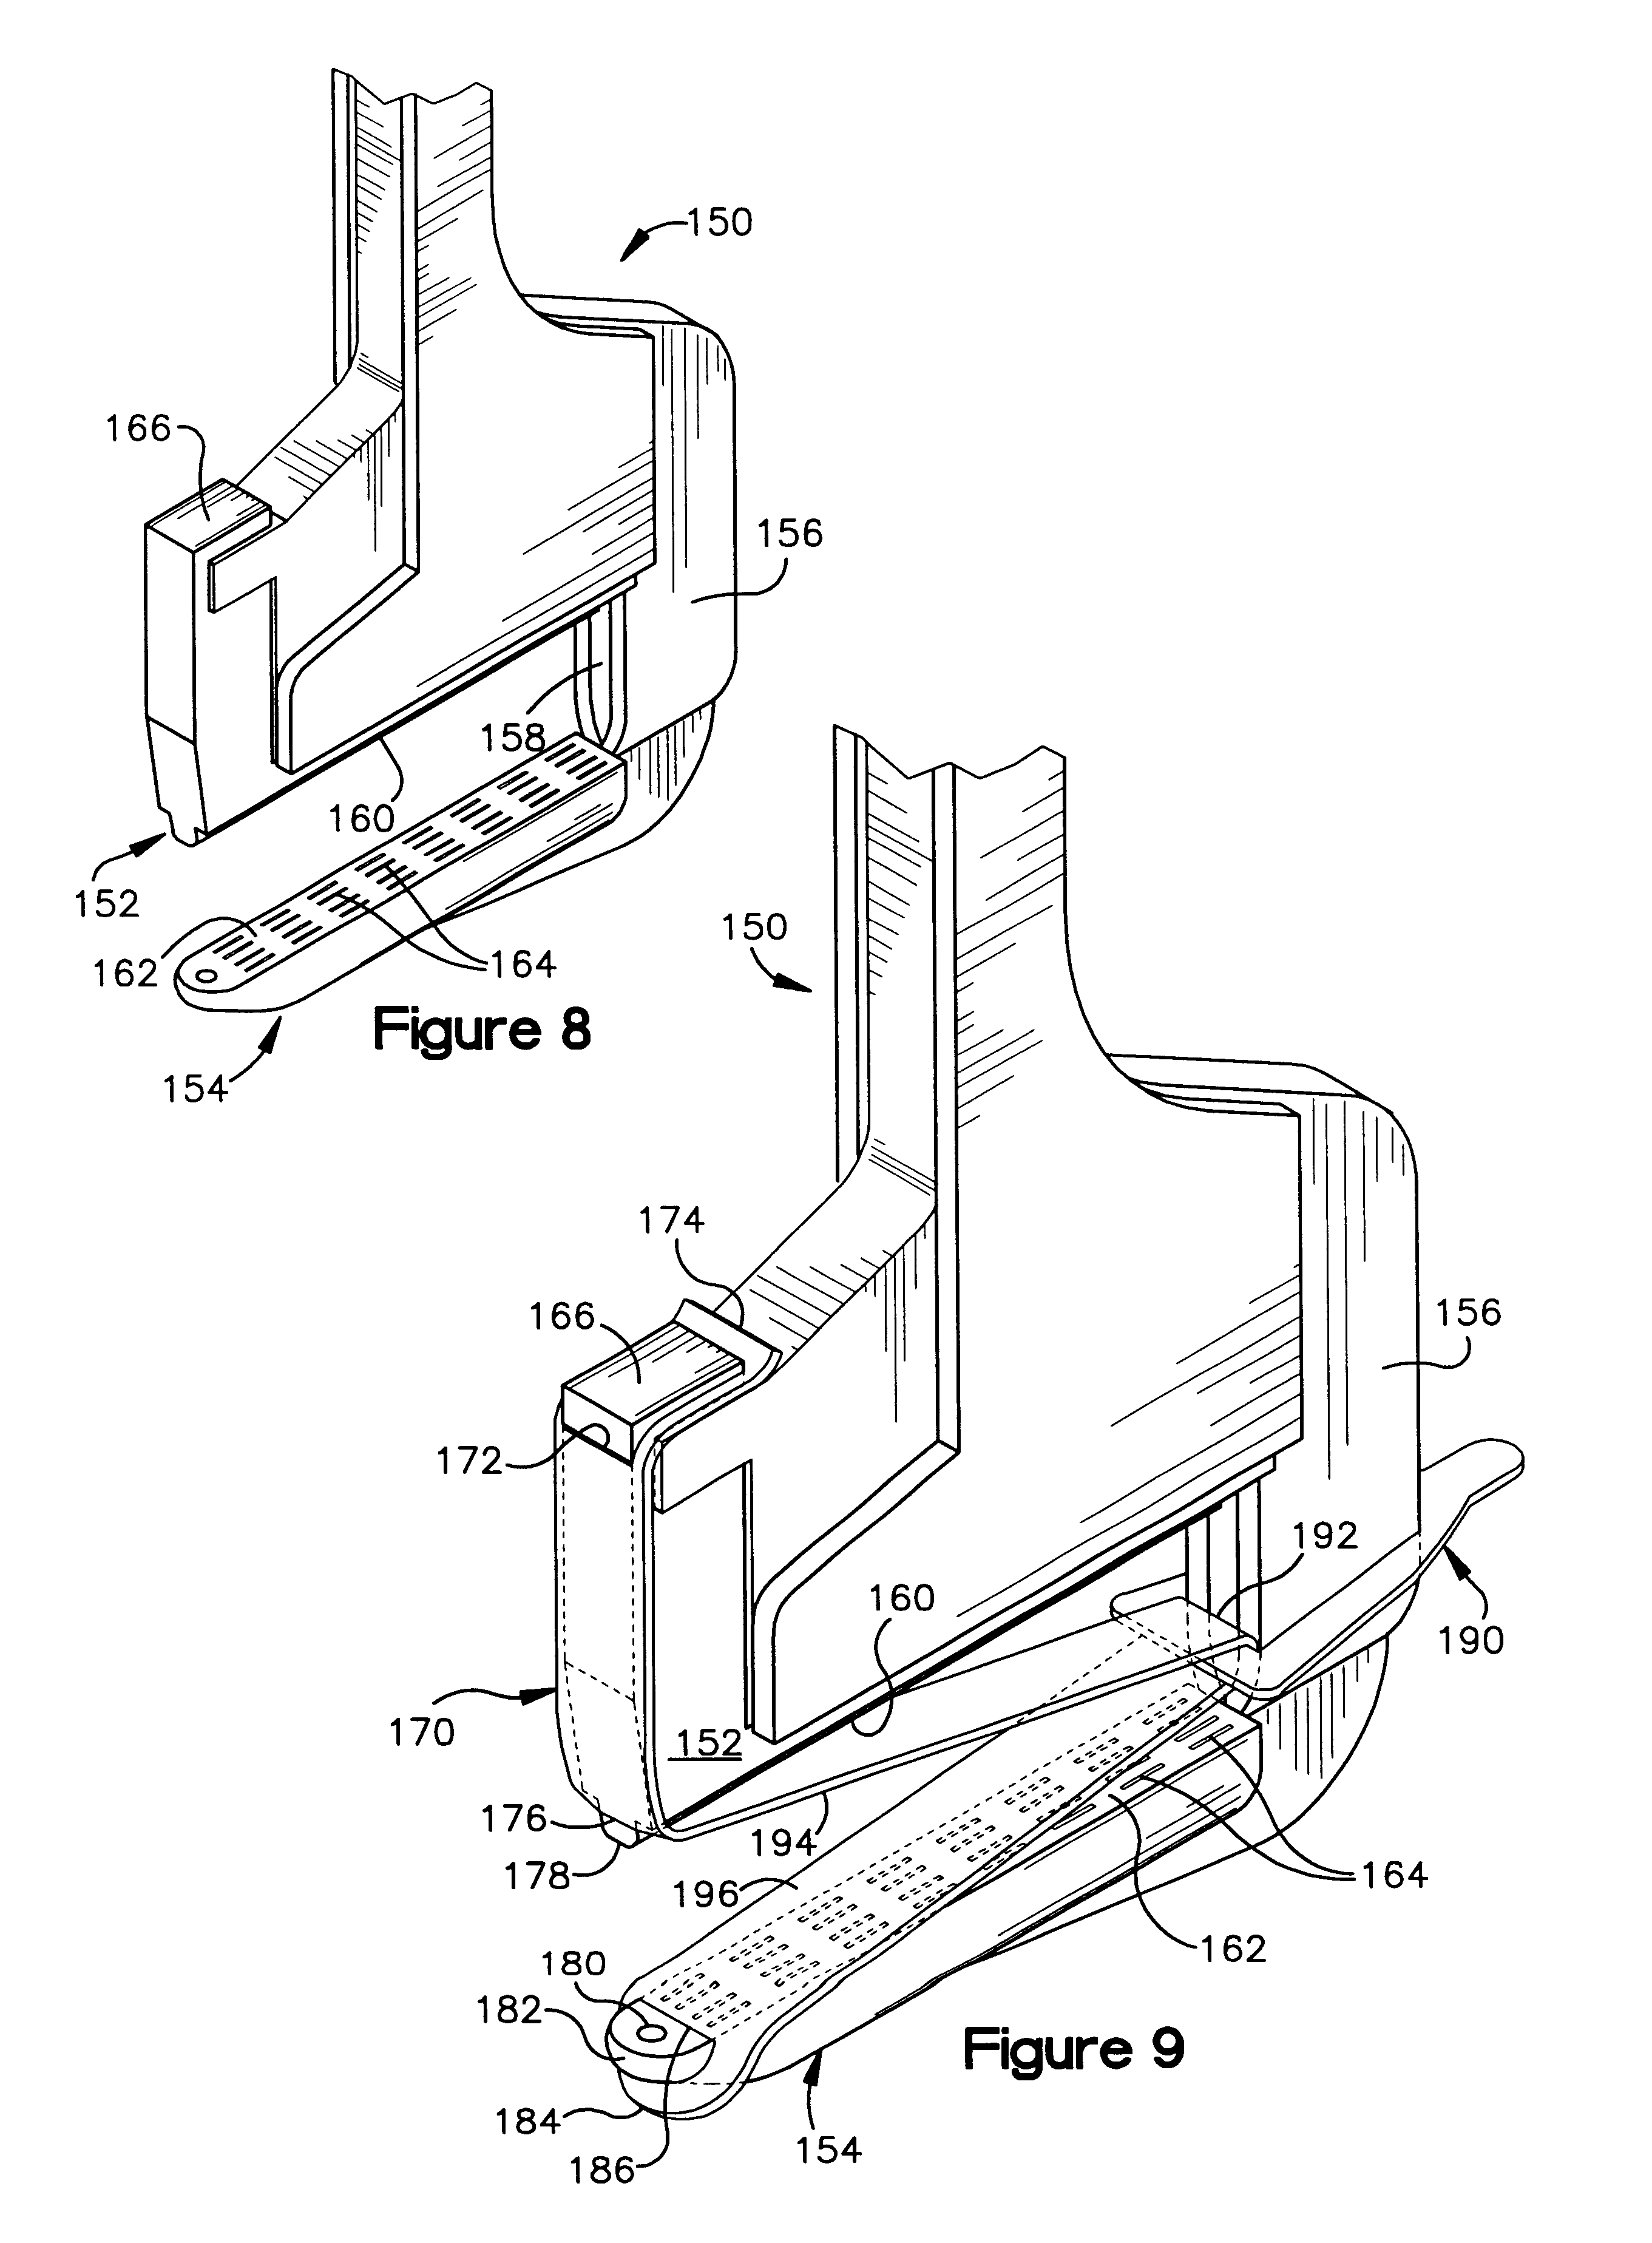 Biological tissue strip and system and method to seal tissue